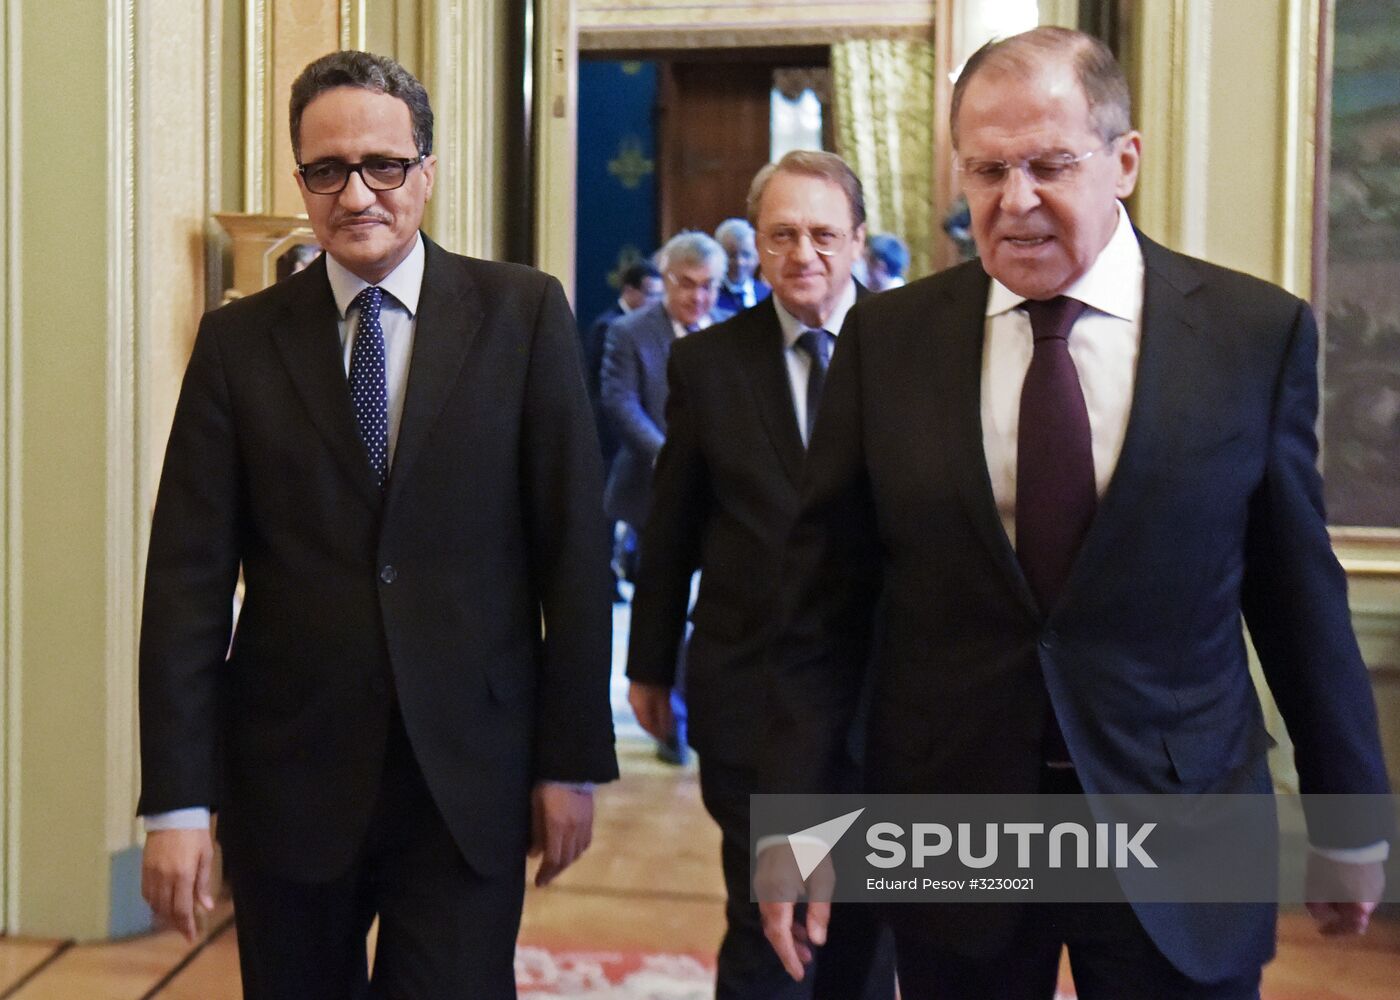 Sergei Lavrov meets with Mauretania Minister of Foreign Affairs and Cooperation Isselkou Ould Ahmed Izid Bih